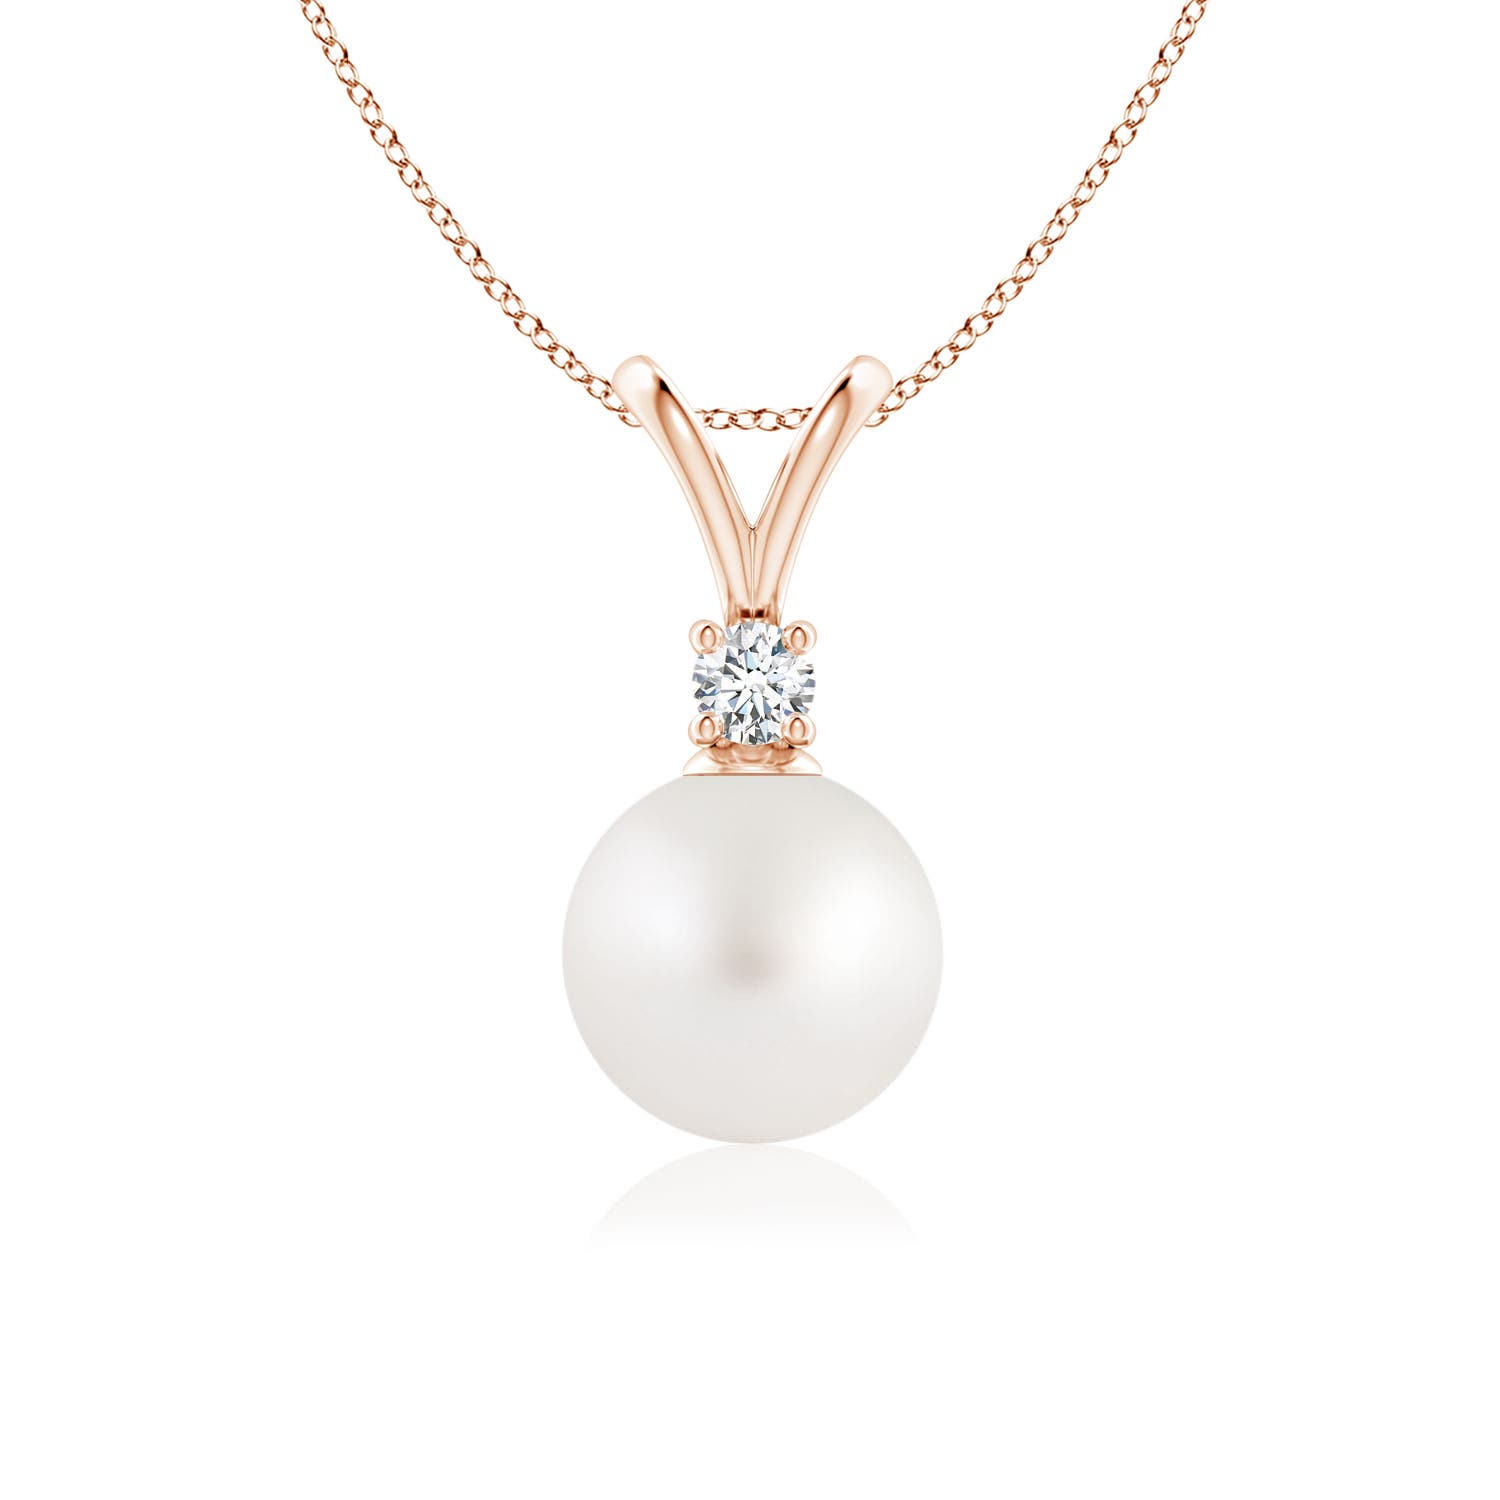 AA - South Sea Cultured Pearl / 3.77 CT / 14 KT Rose Gold